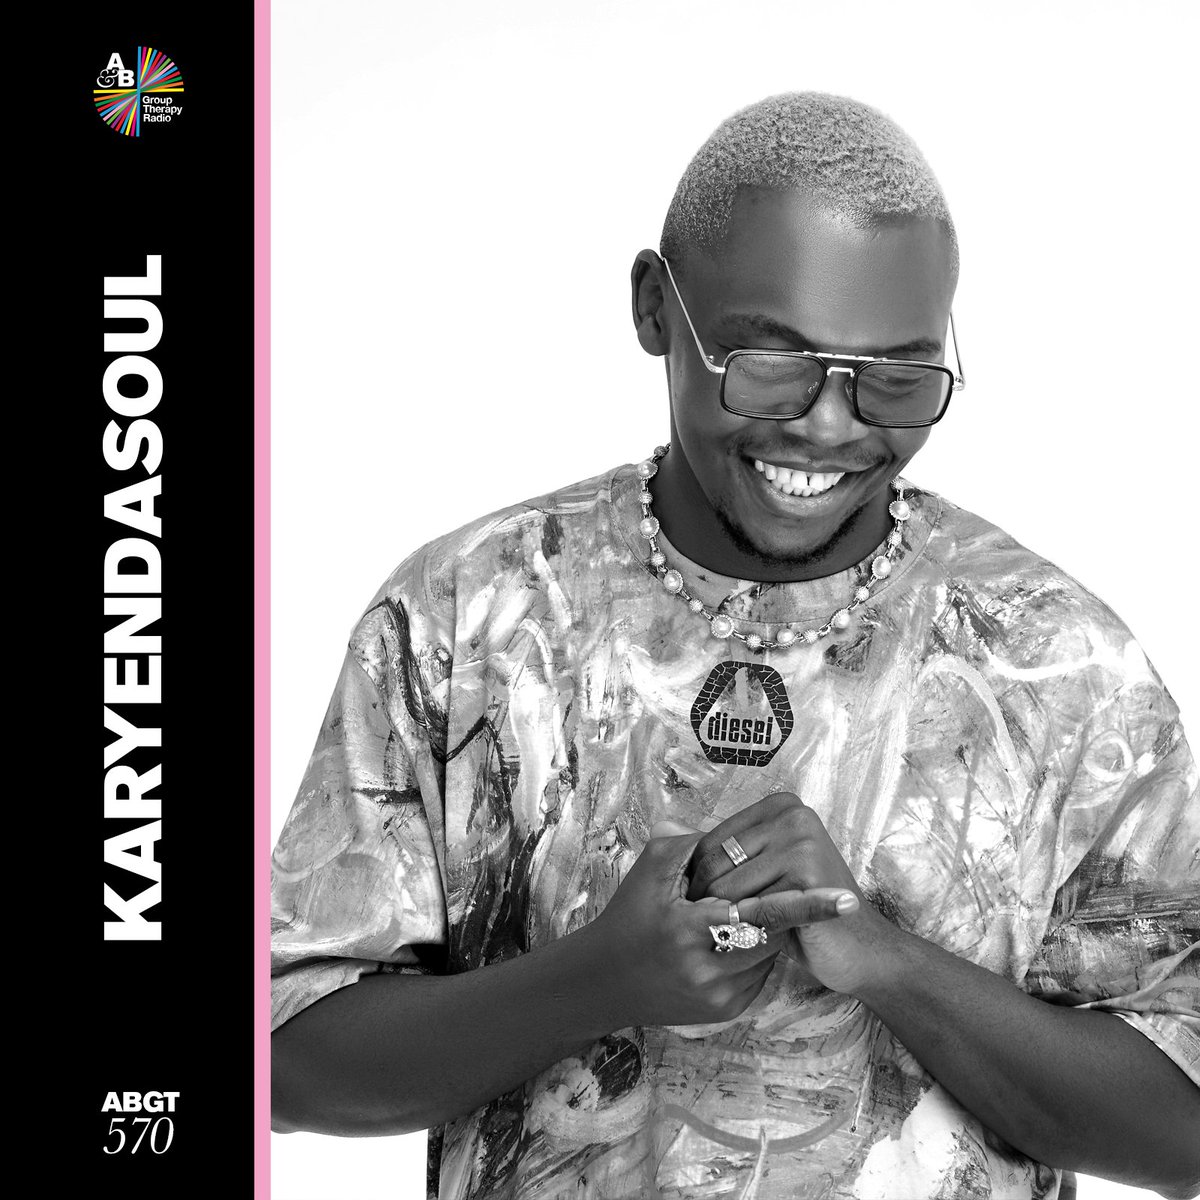 💿 On the guest mix this week: @Karyendasoul ✨ An incredibly talented DJ and producer, he was featured on the @Anjunadeep South Africa EP, and you can catch him on the lineup for the label's first-ever Open Air shows in South Africa this month. Tune in tomorrow at 7pm GMT ⏰🎶